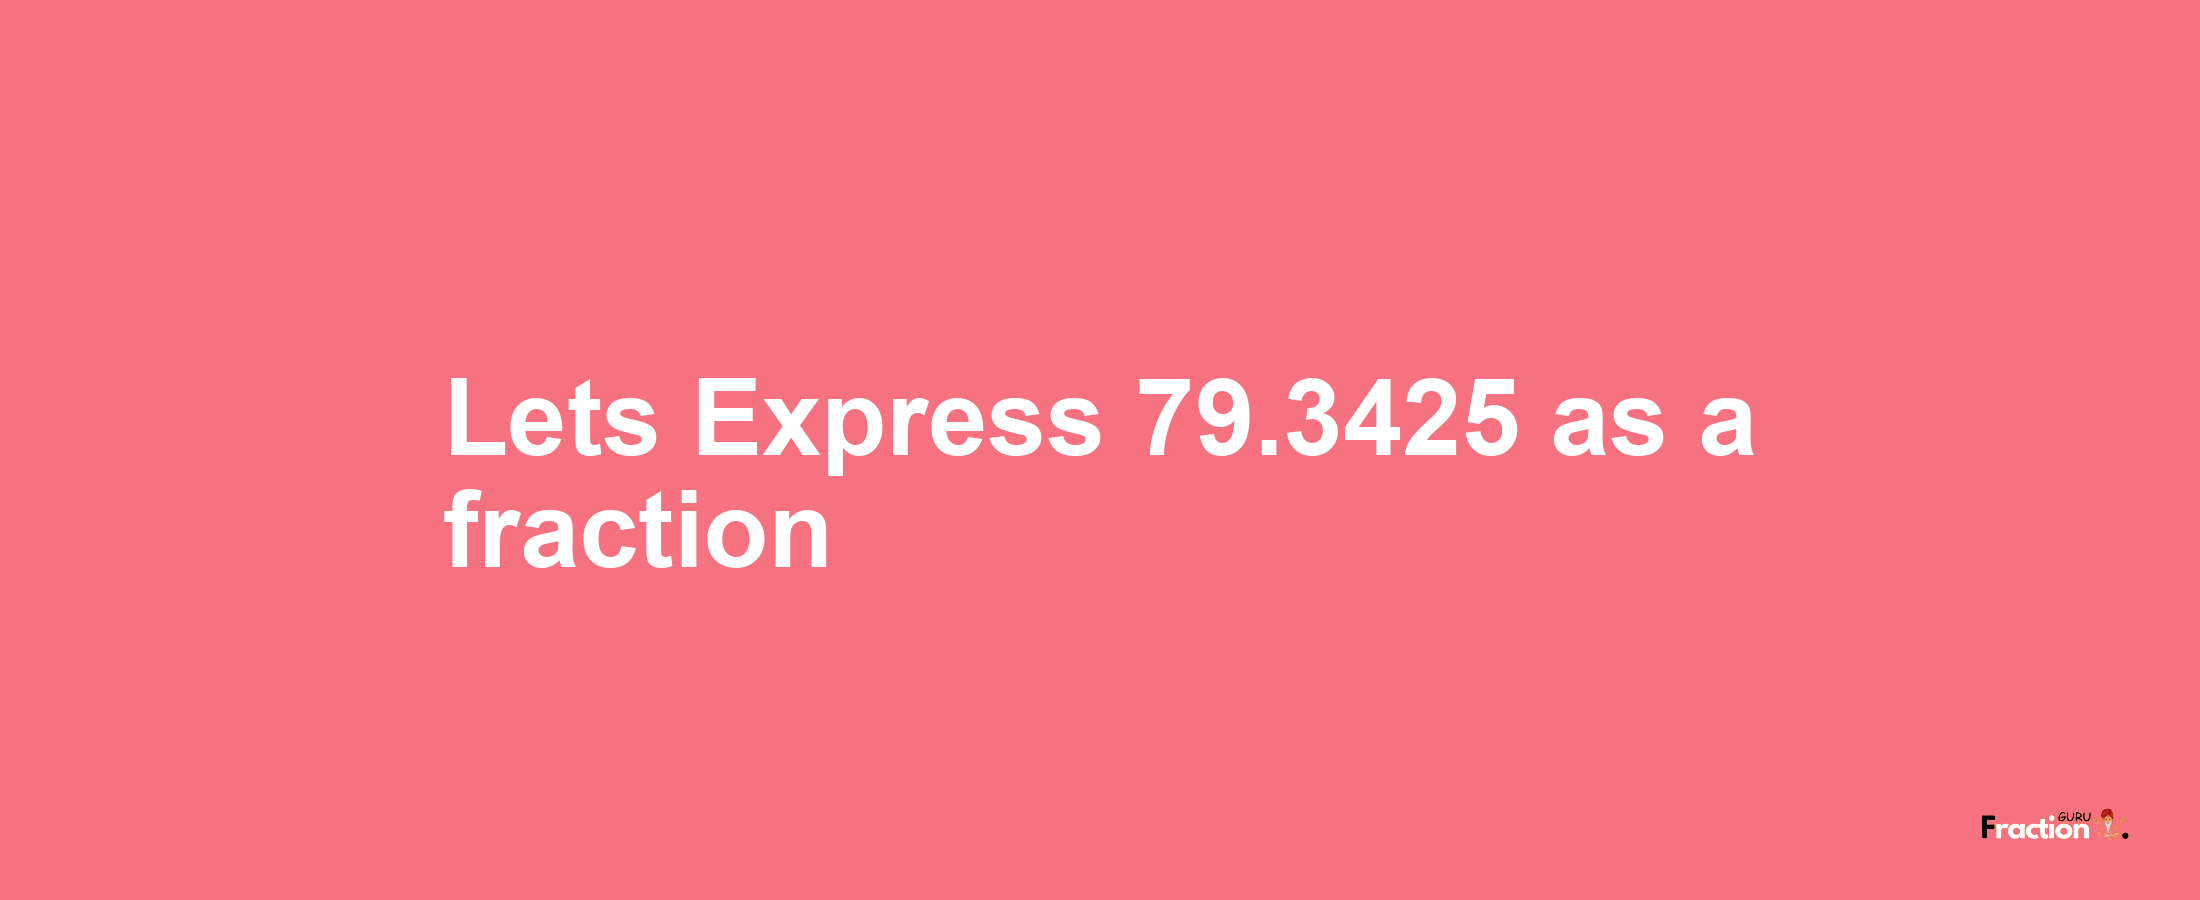 Lets Express 79.3425 as afraction